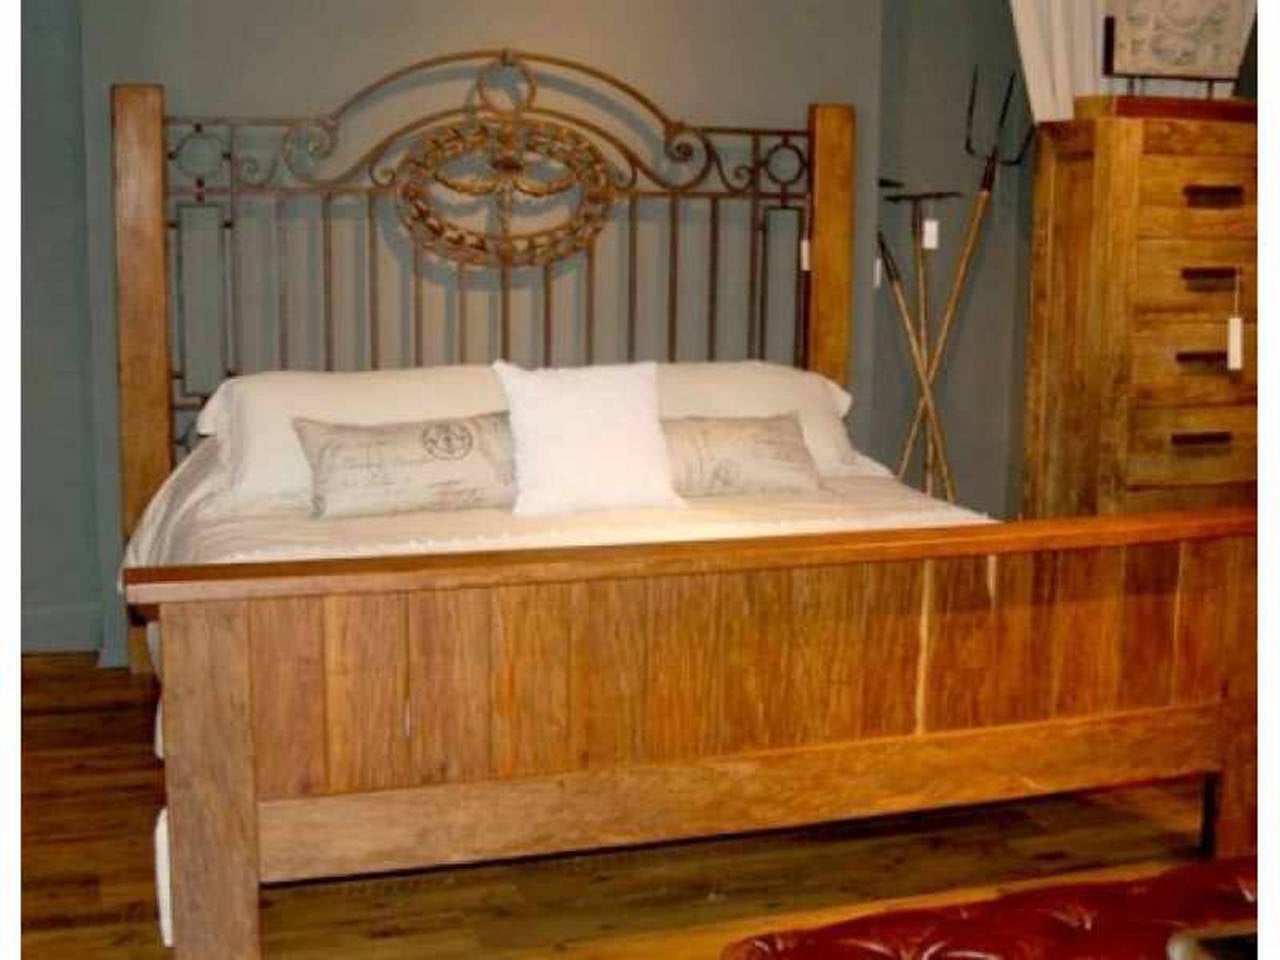 Beautiful Deco vintage King Bed Frame with wrought iron headboard.
Please feel free to contact us for more information & measurements.